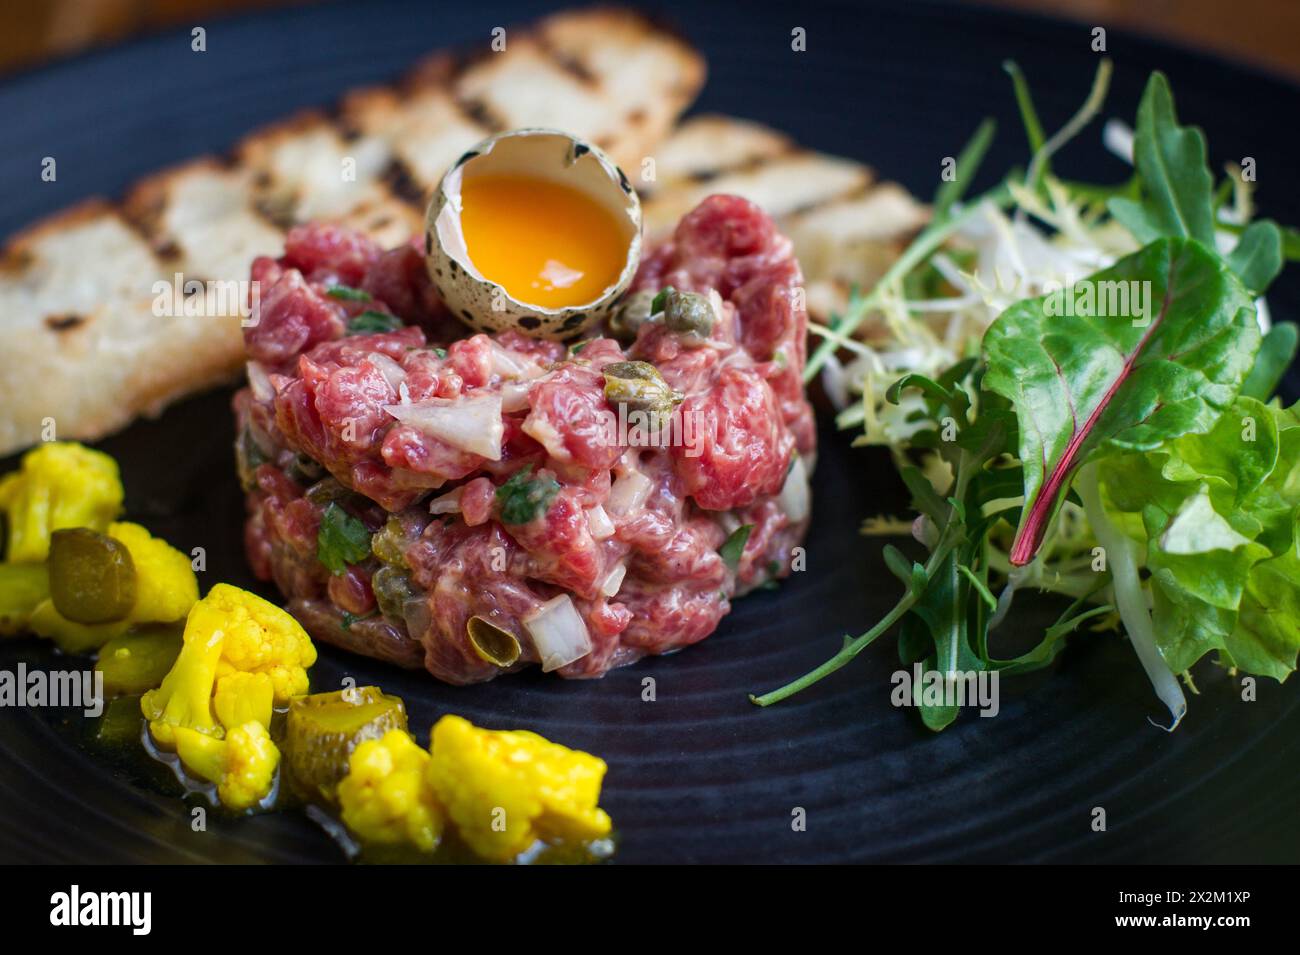 Steak tartare with quail egg, toast and piccalilli on plate in a restaurant Stock Photo